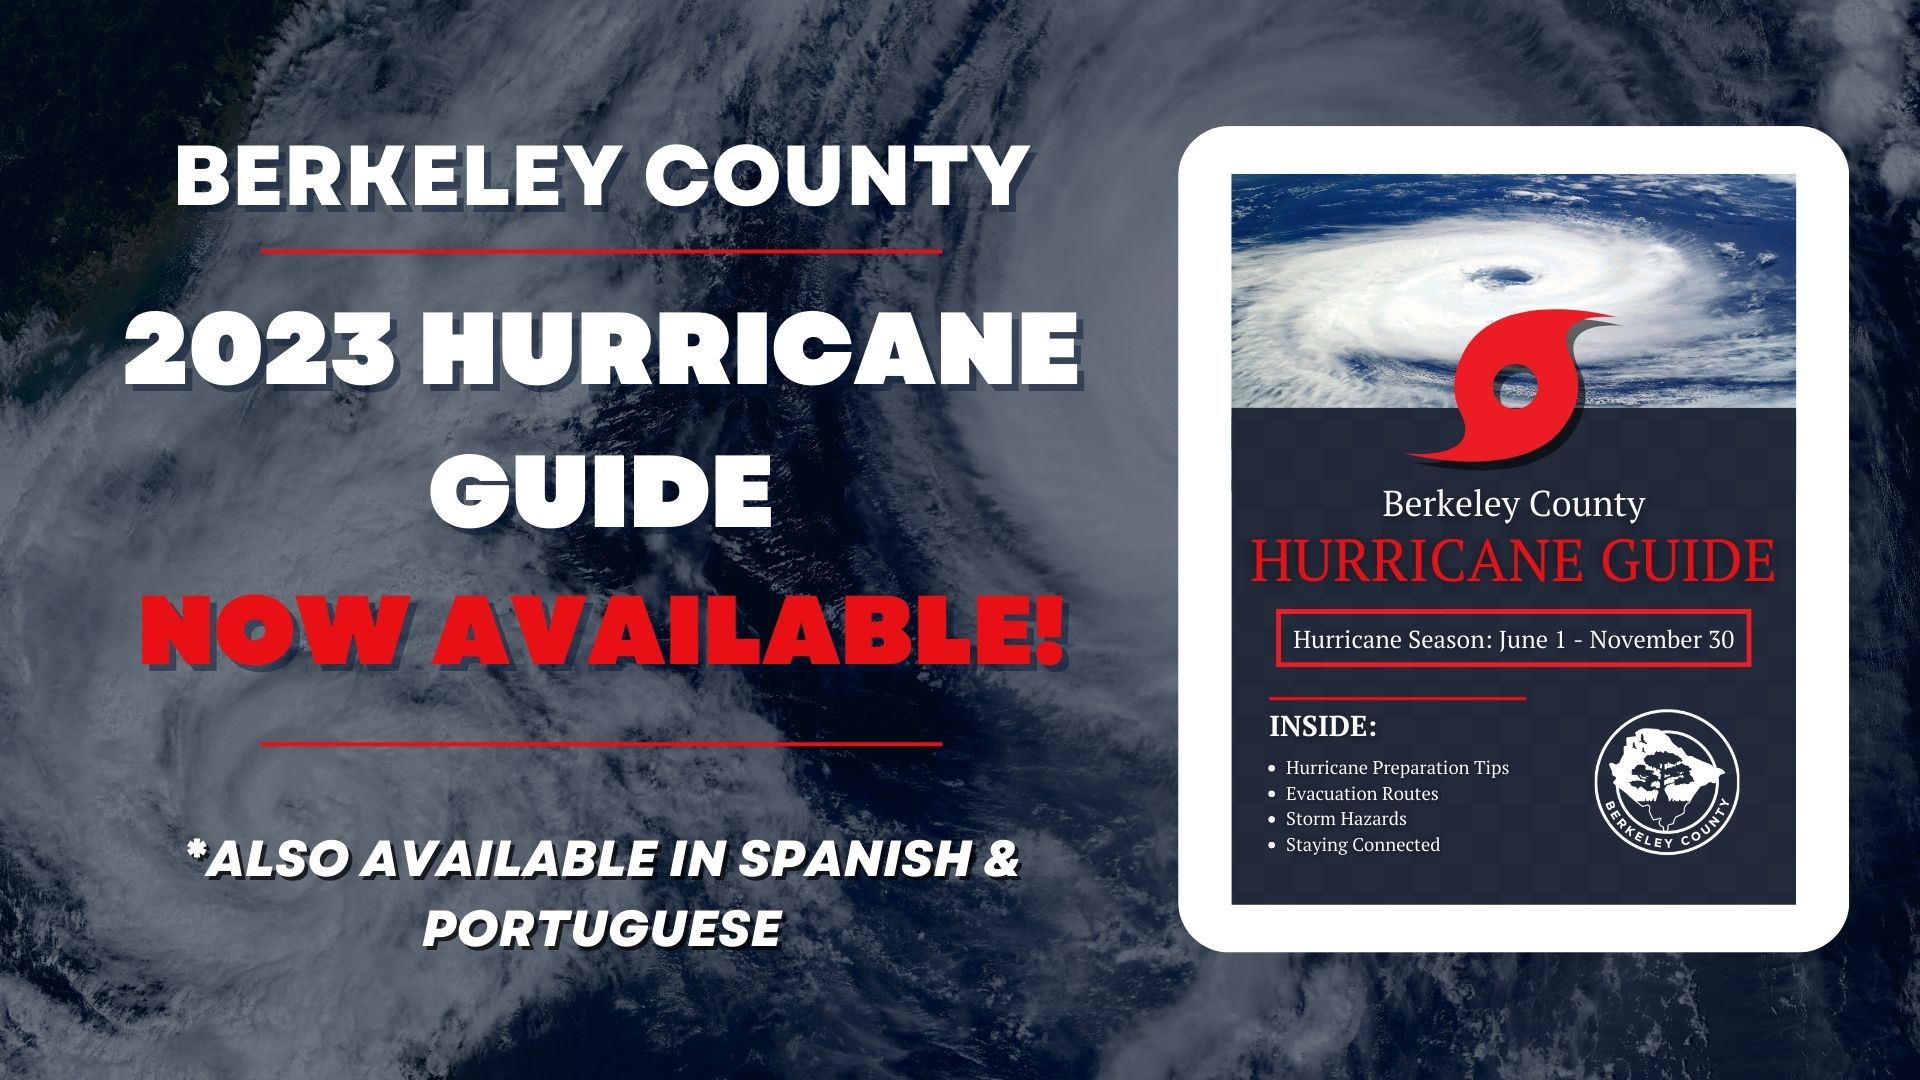 Berkeley County Government Releases 2023 Hurricane Guide